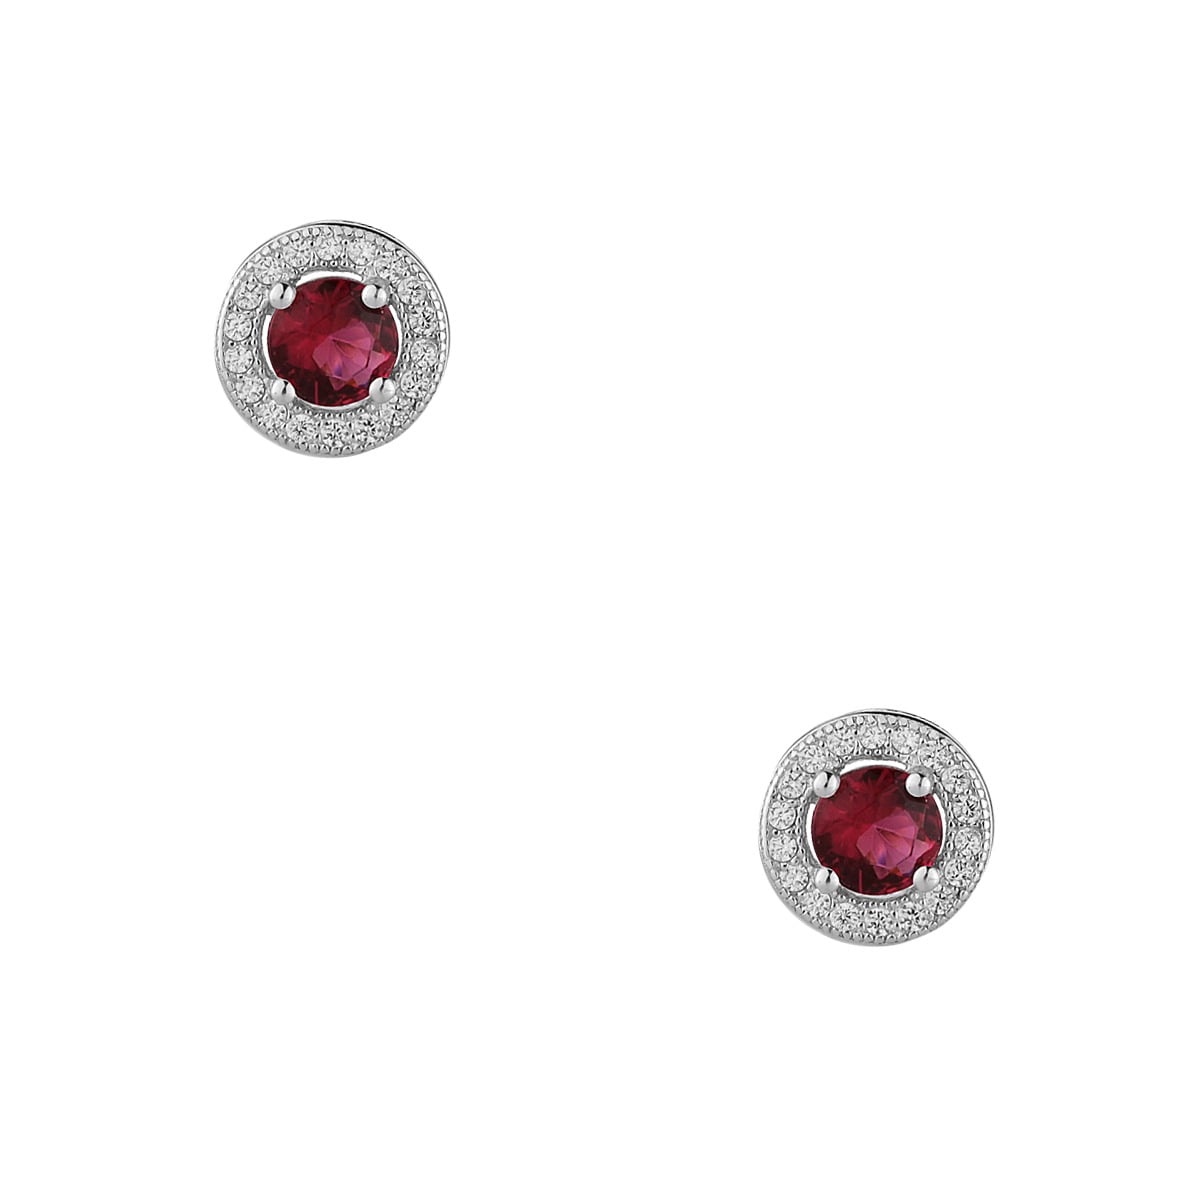 Round rosette earrings in white silver 925, with synthetic ruby and white zirconia.